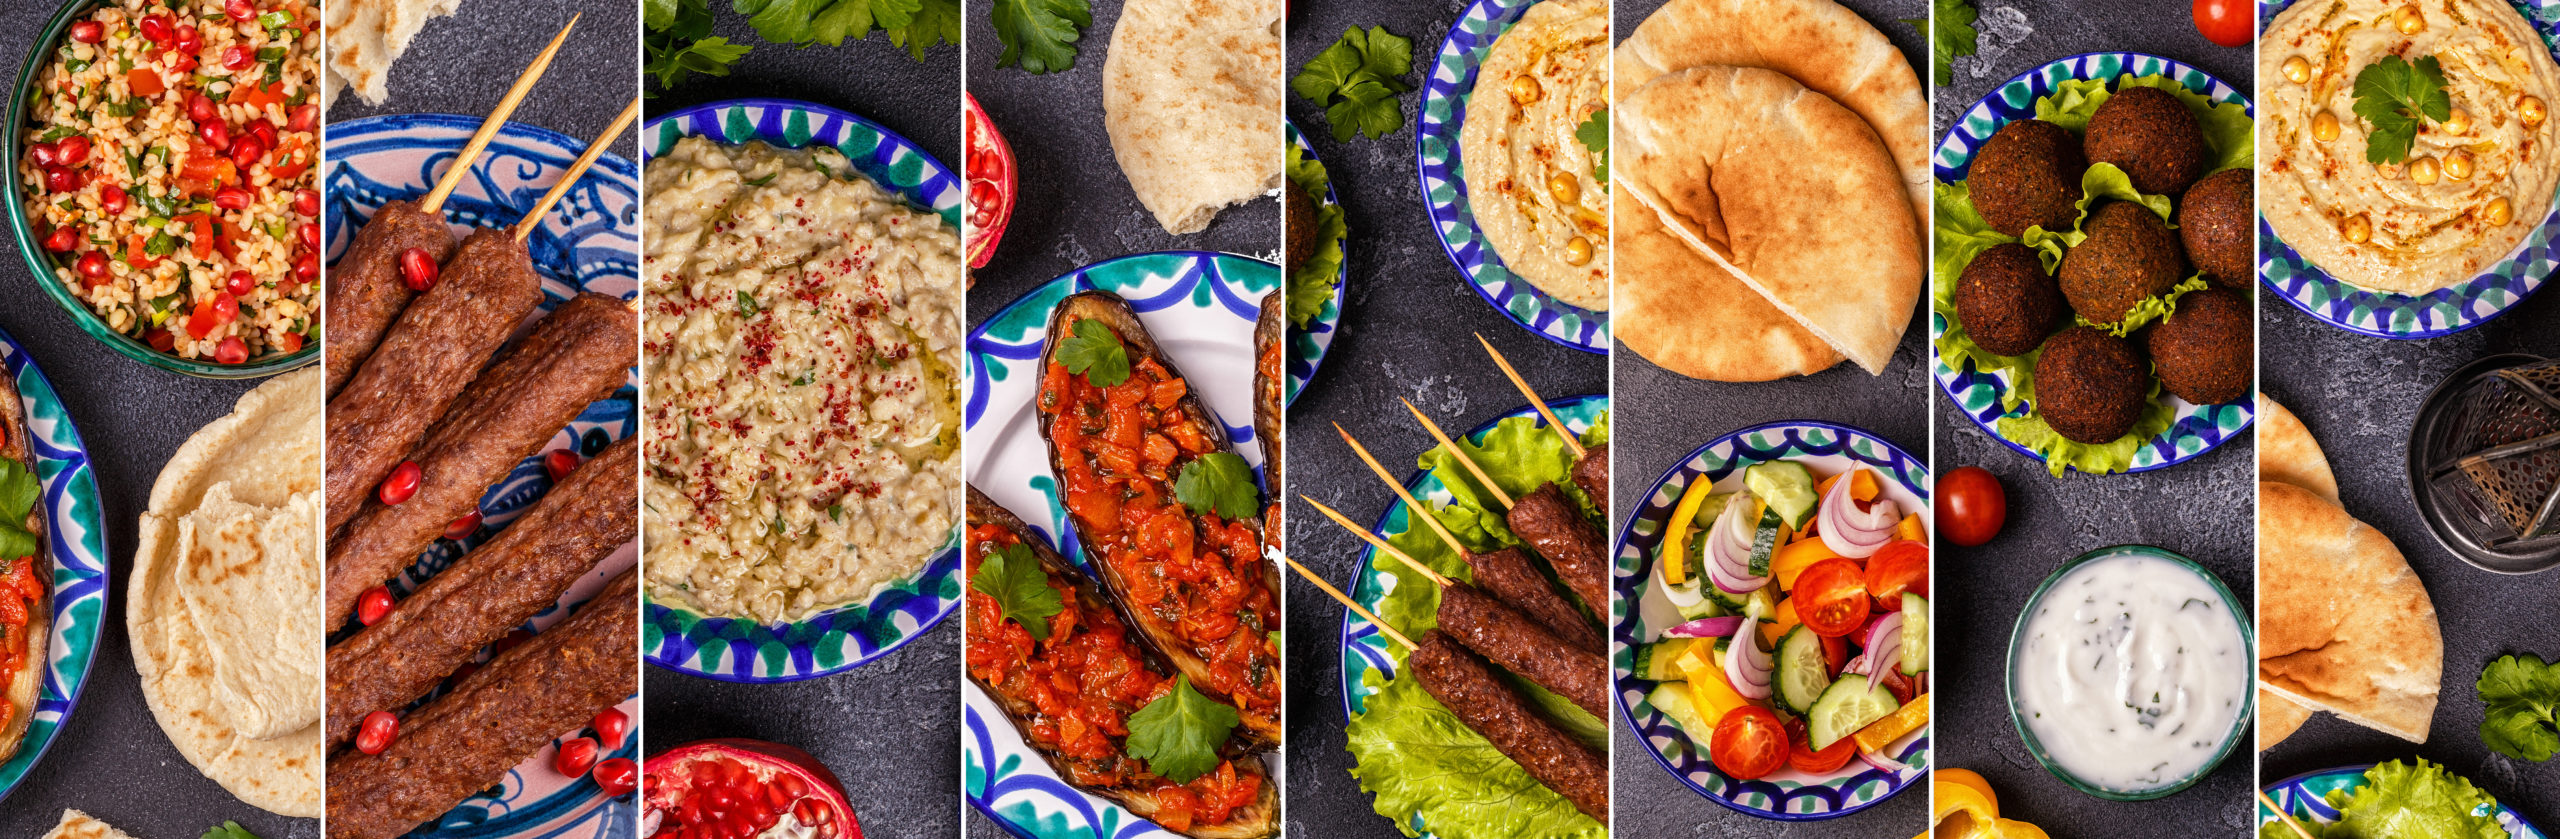 “Is Moroccan food spicy?”. Find out the answer to this question along with other facts about Morocco's food and the culture behind in this article